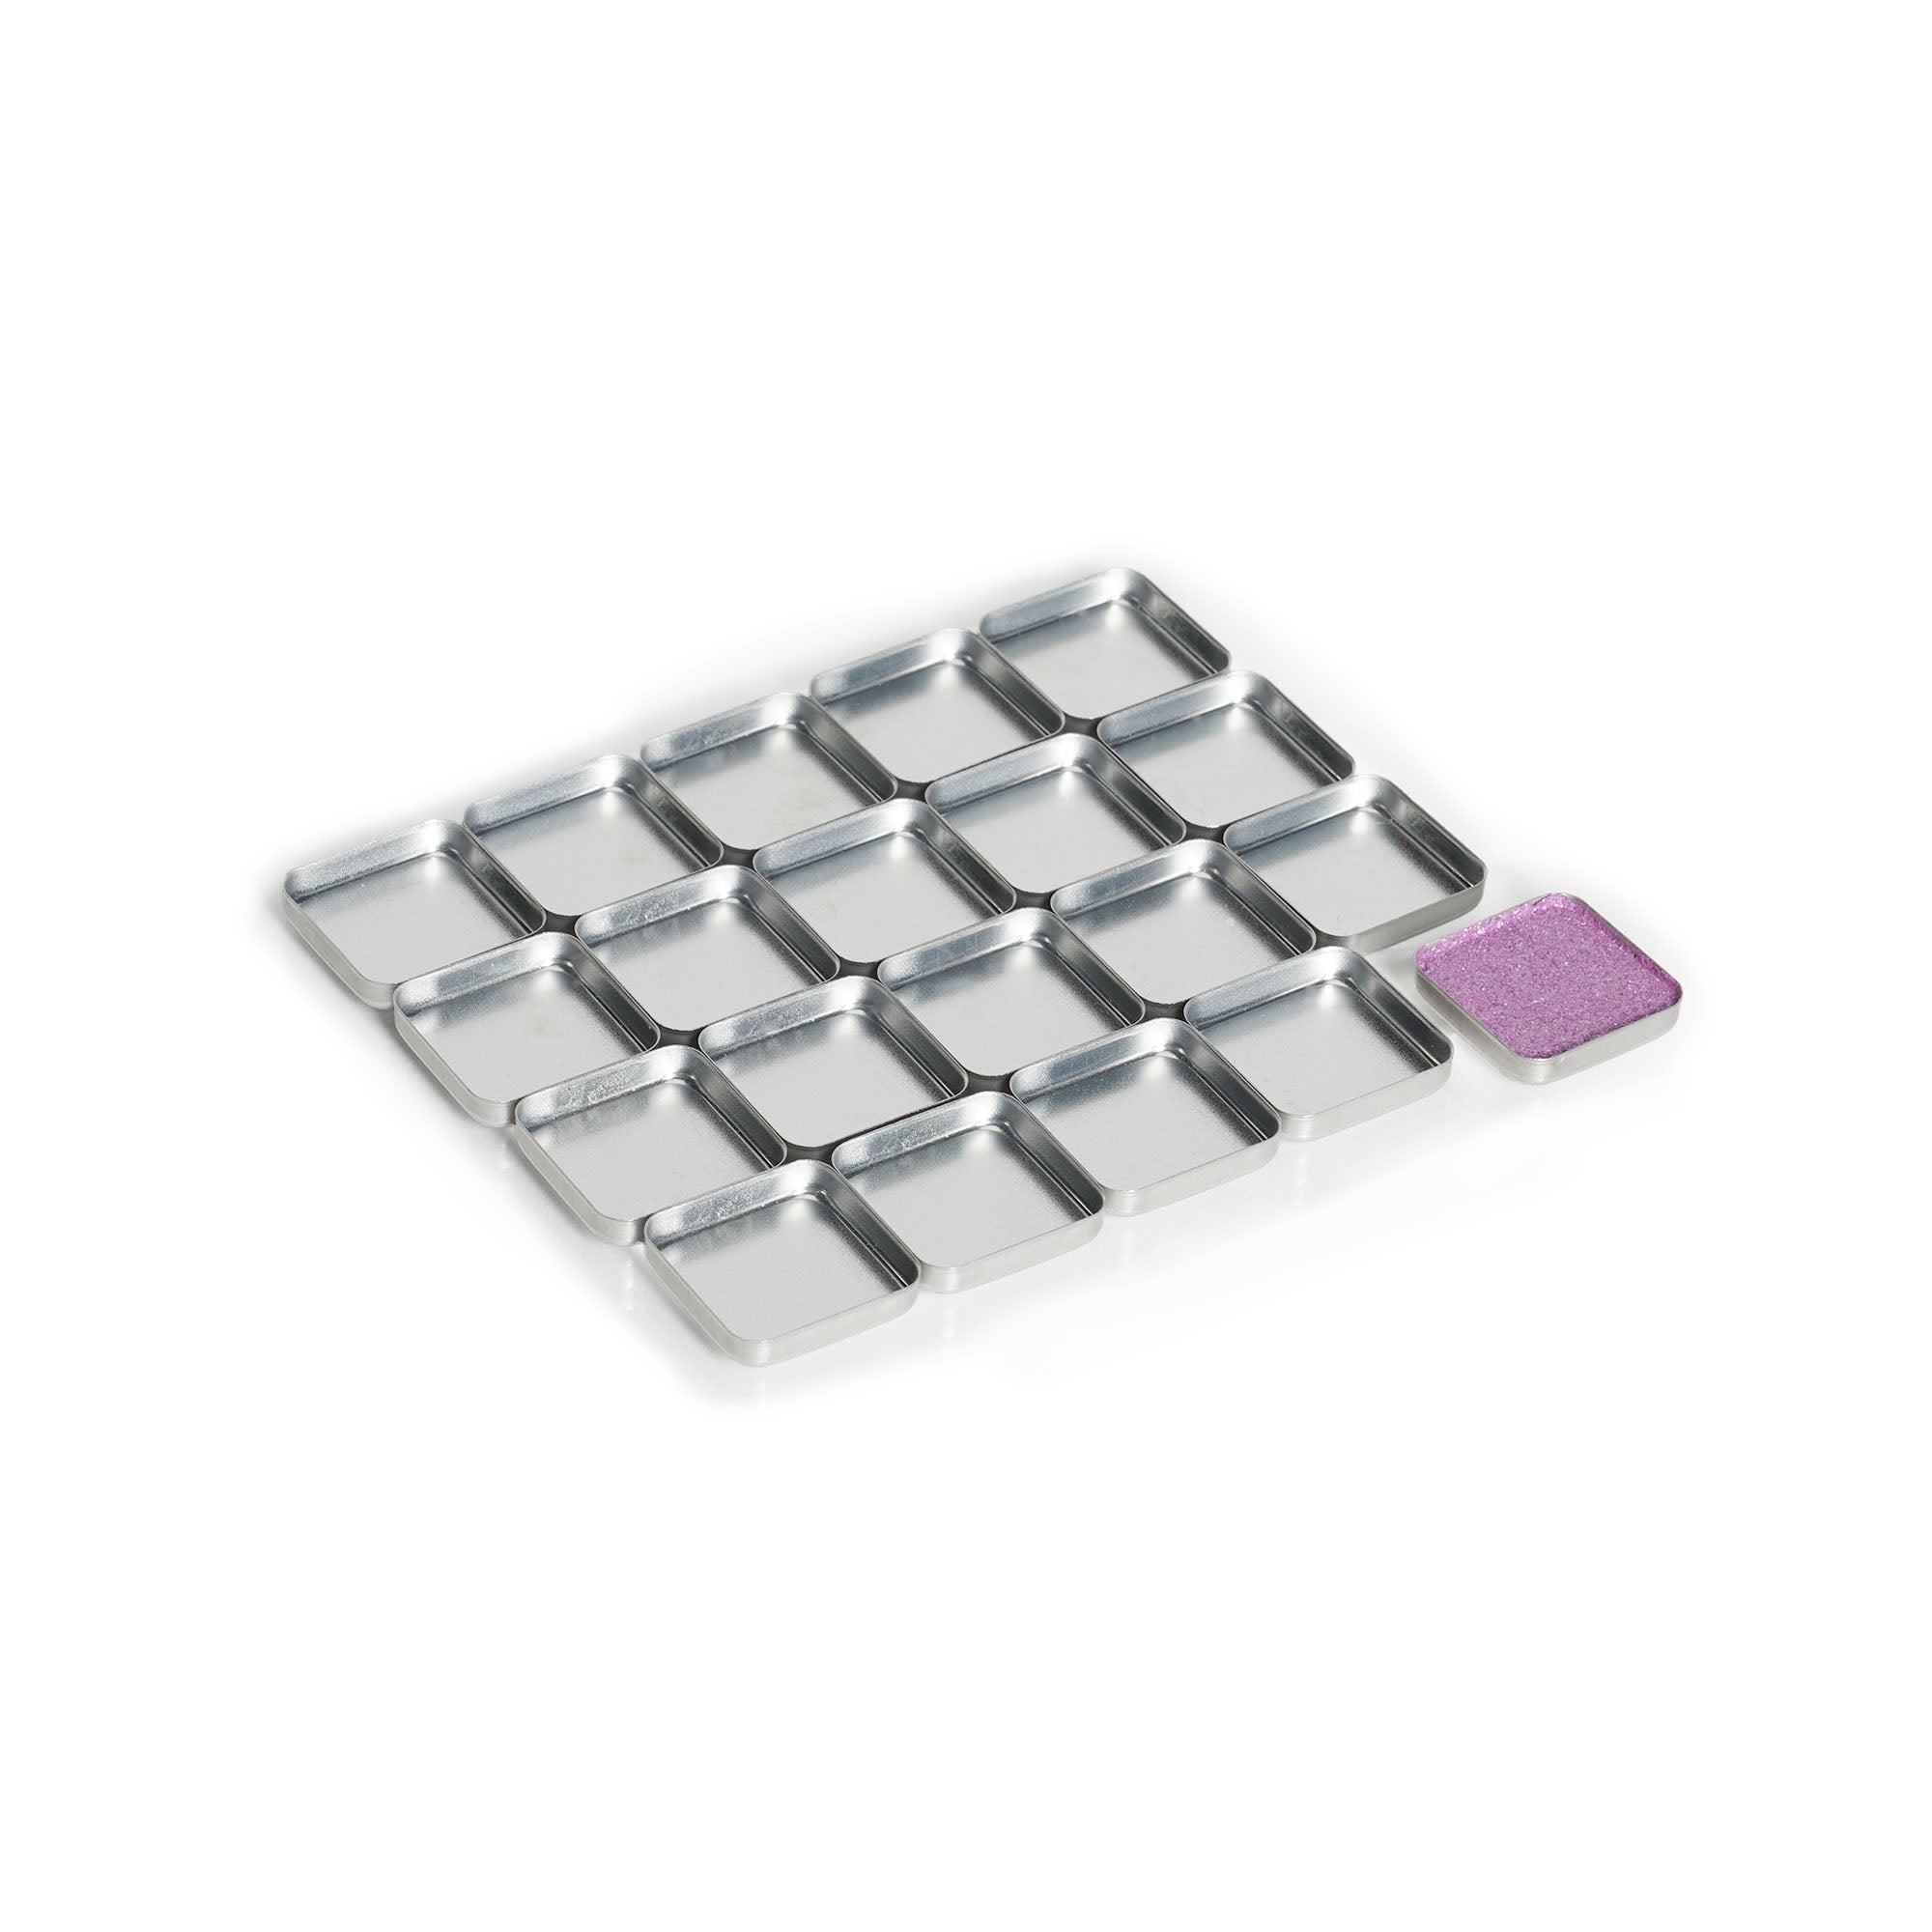 Twenty 20 square-shaped refill magnetic makeup pans, each measuring 21 x 21 mm, for the FIXY Broken Makeup Repressing System, showcasing one pan with product to illustrate usage, ideal for repairing and customizing makeup